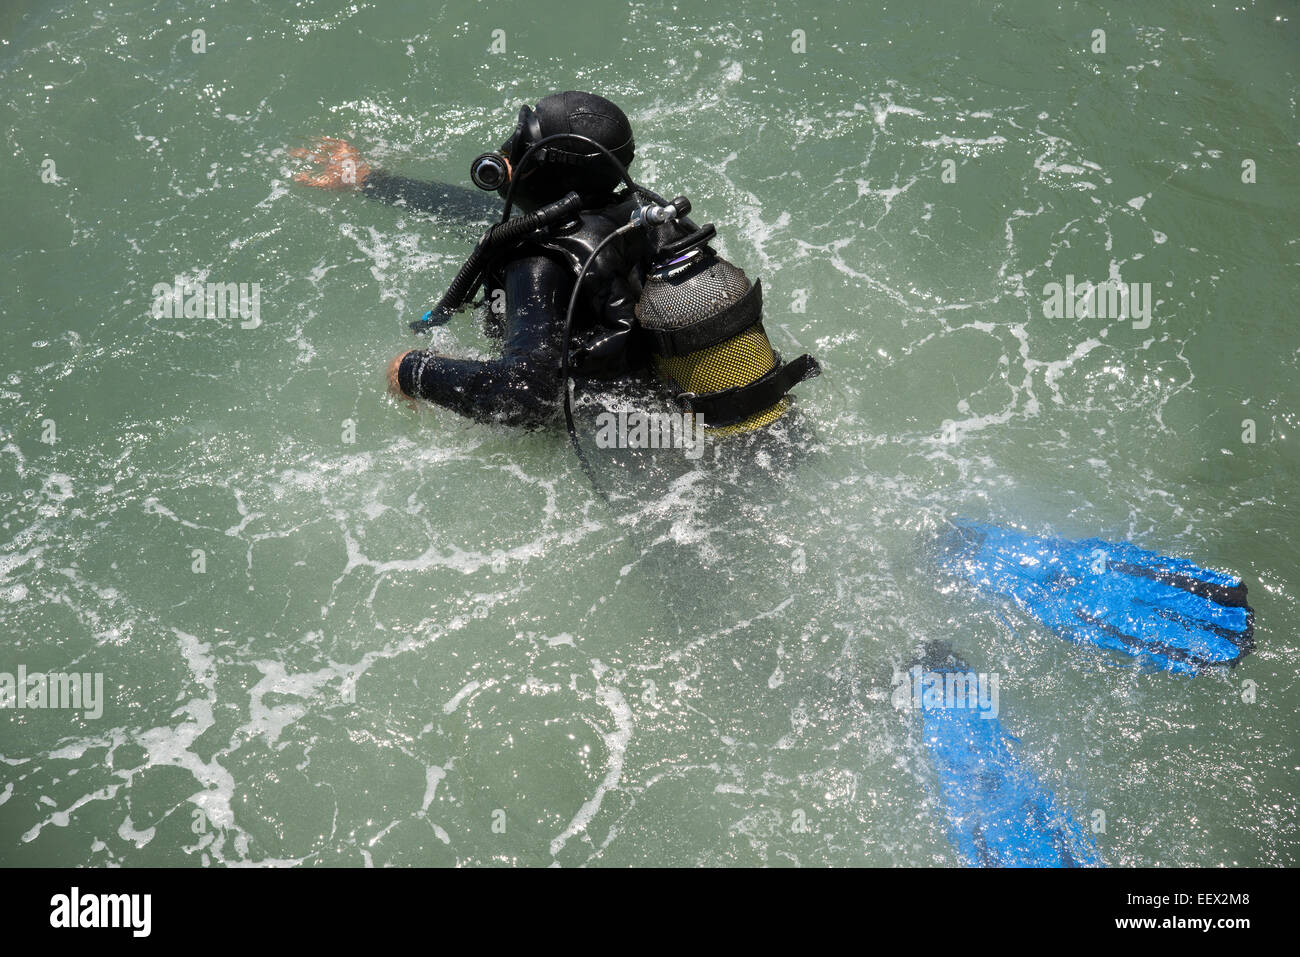 Commercial deep sea diver entering the water with a splash Stock Photo